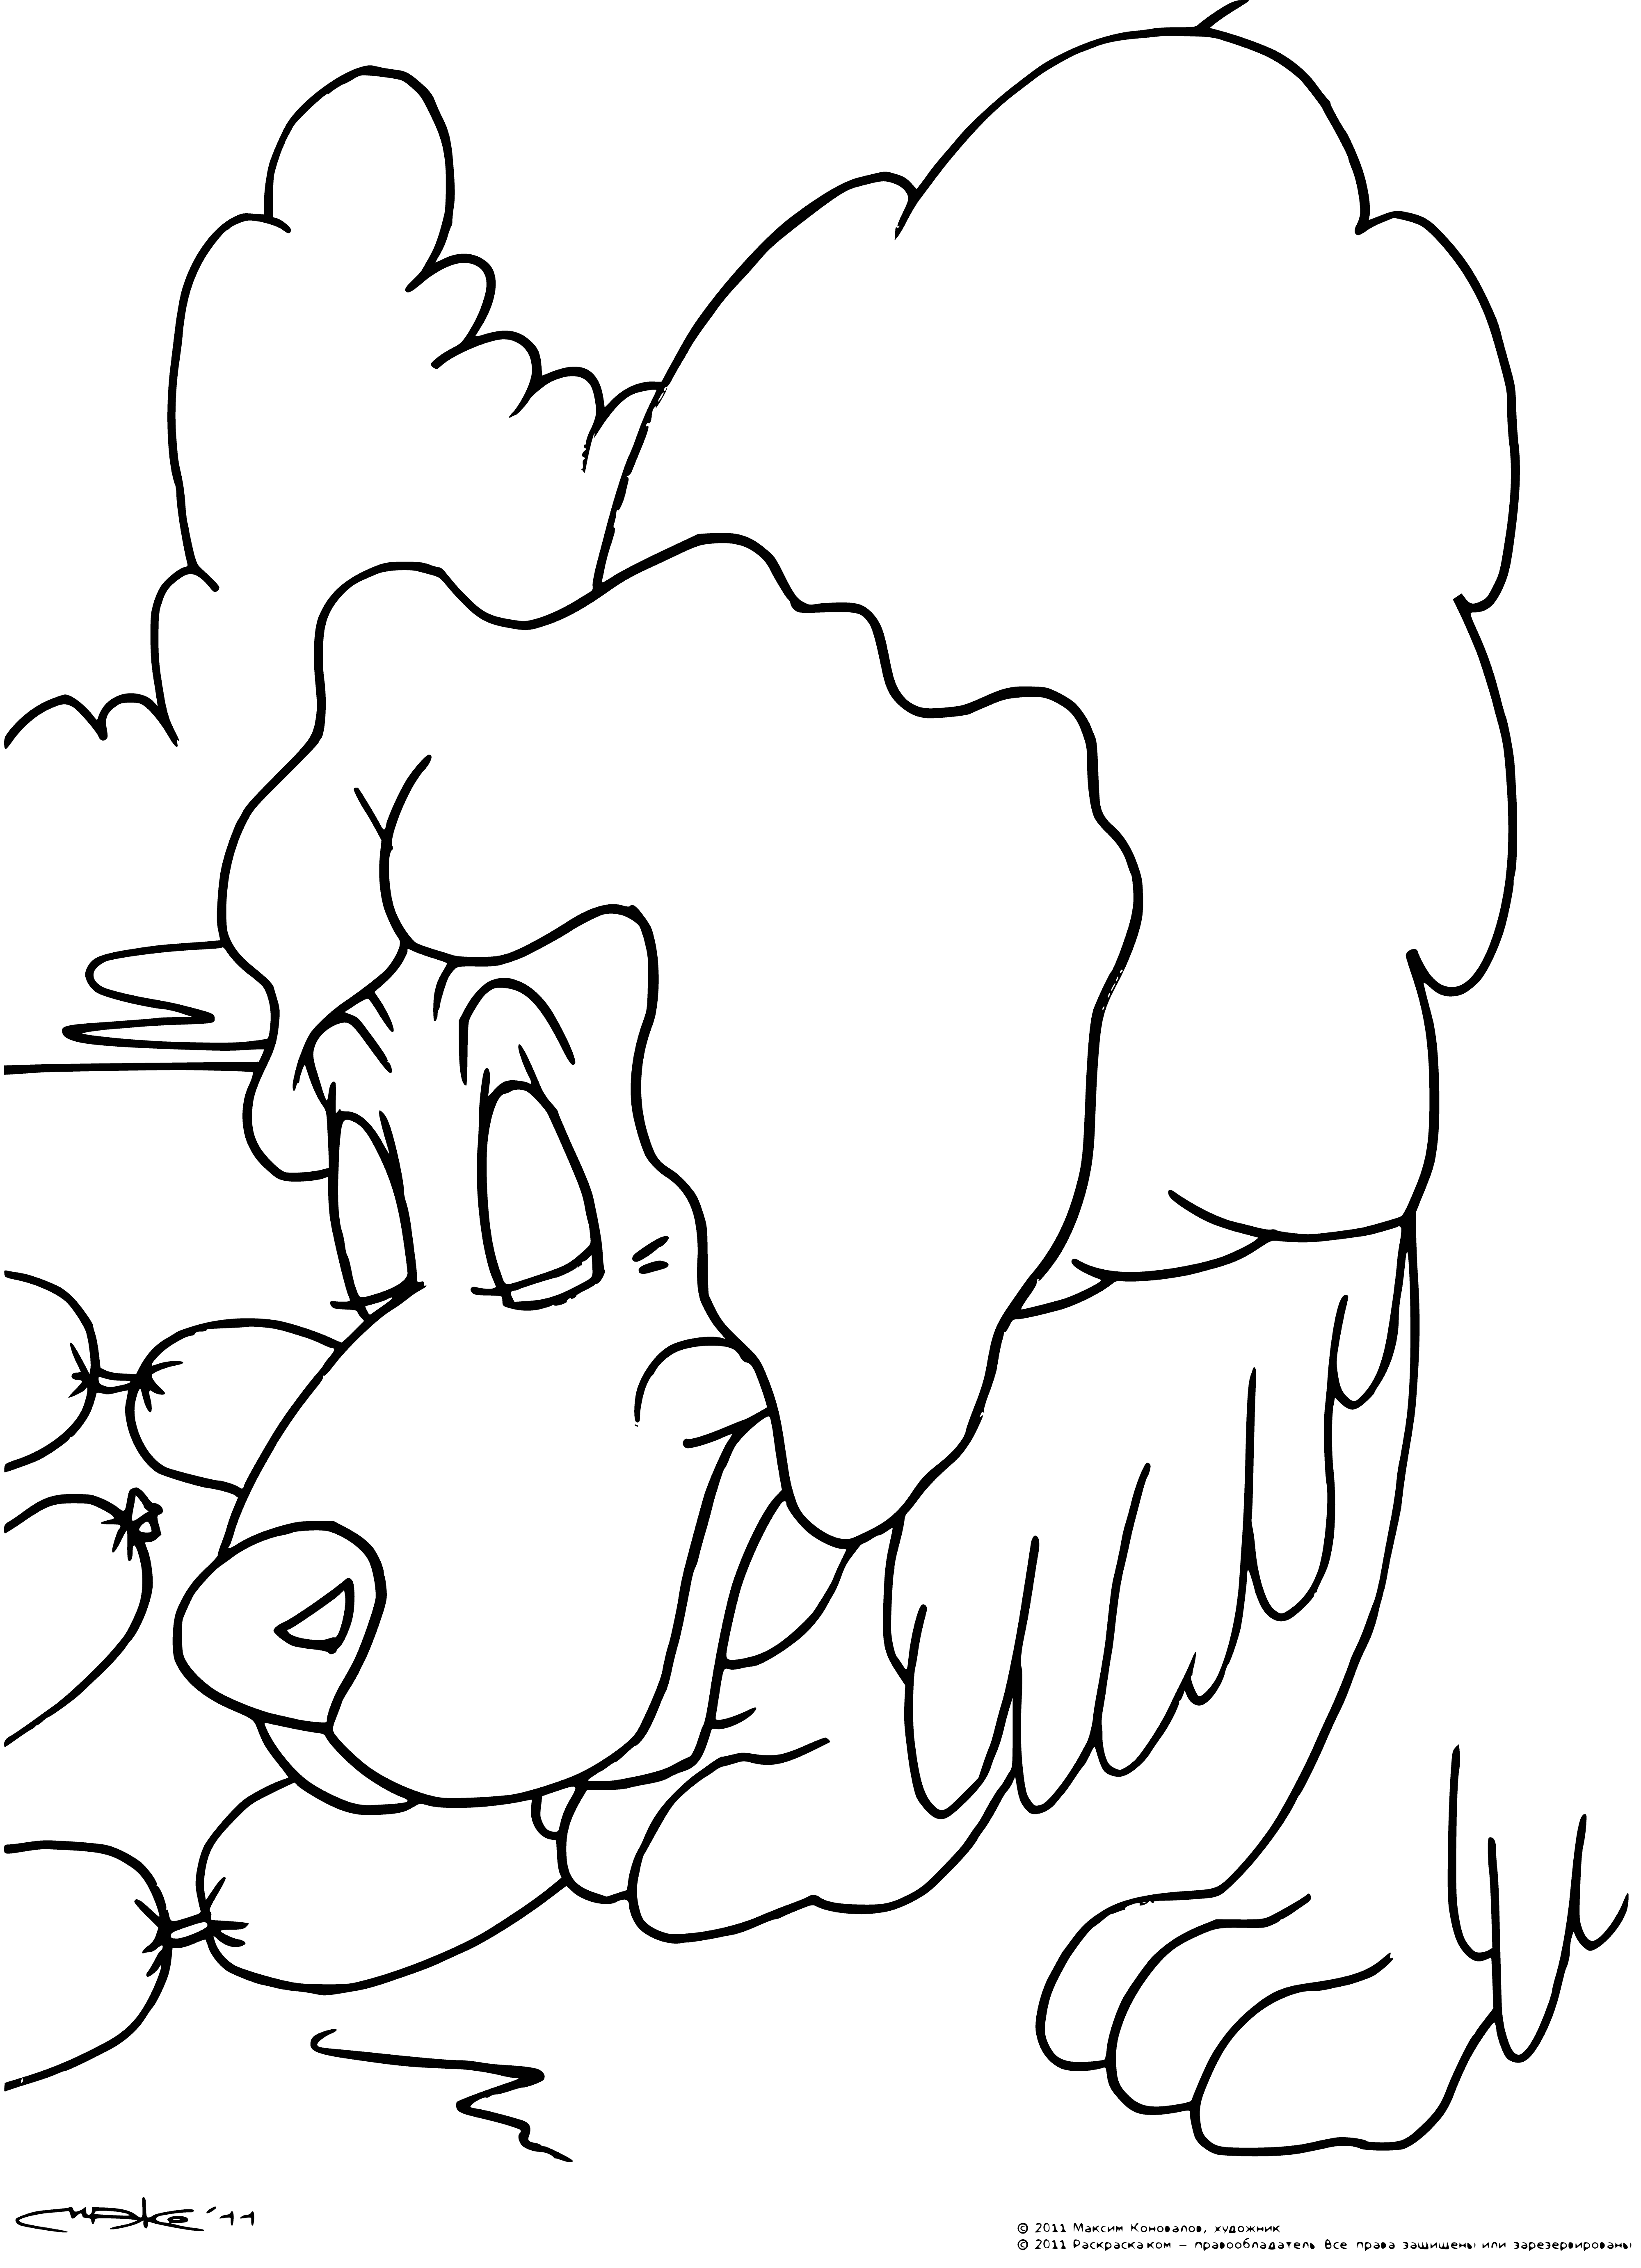 coloring page: Coloring page of a small dog named Sausages wearing blue boots and panting, tongue out. Ready to be colored!